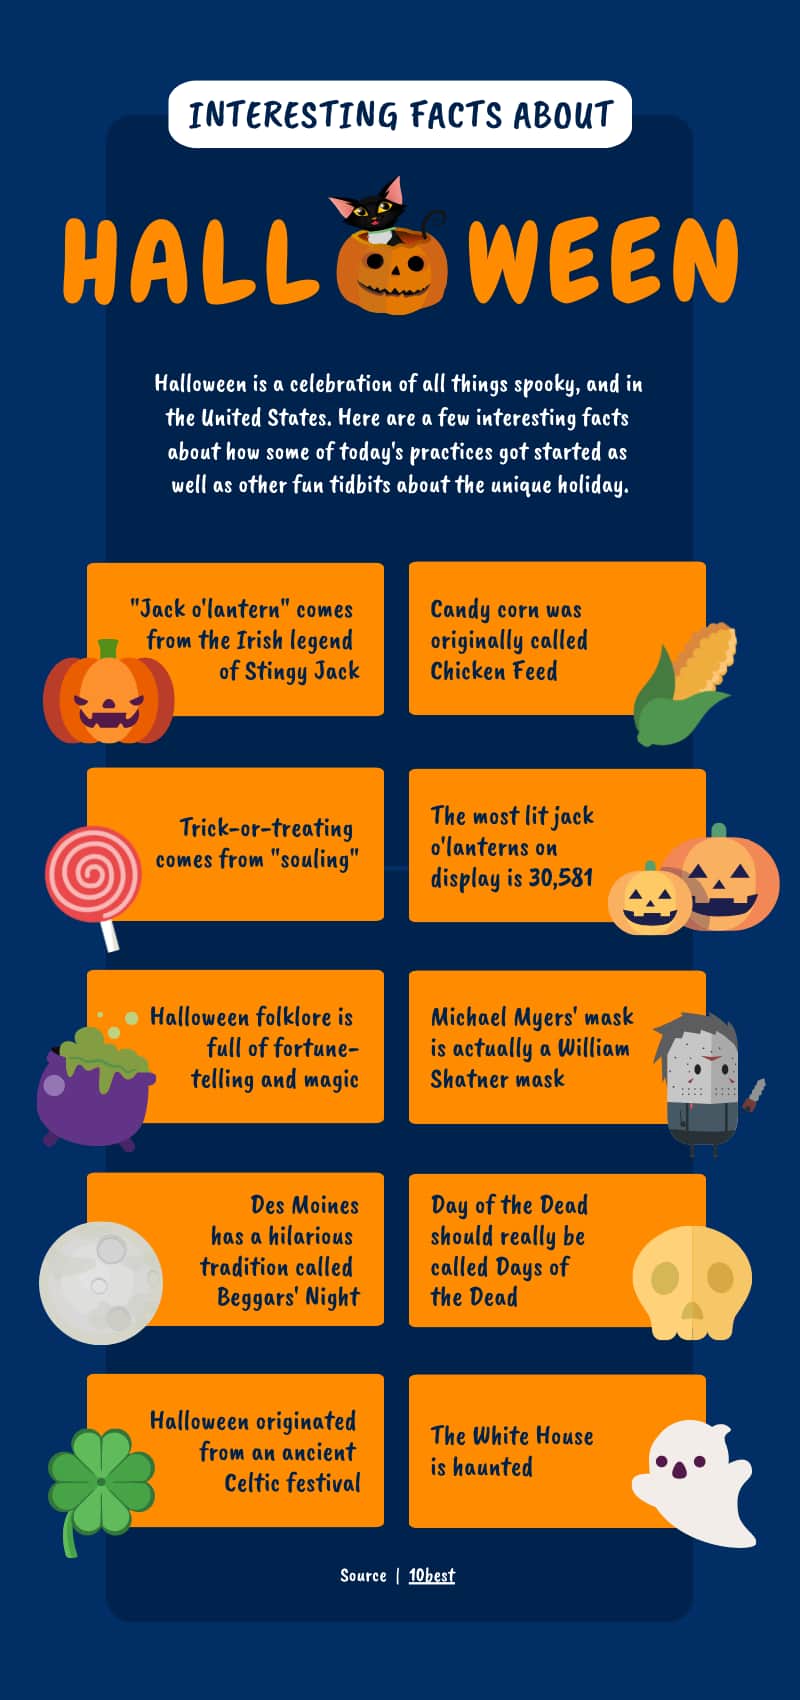 Halloween facts infographic